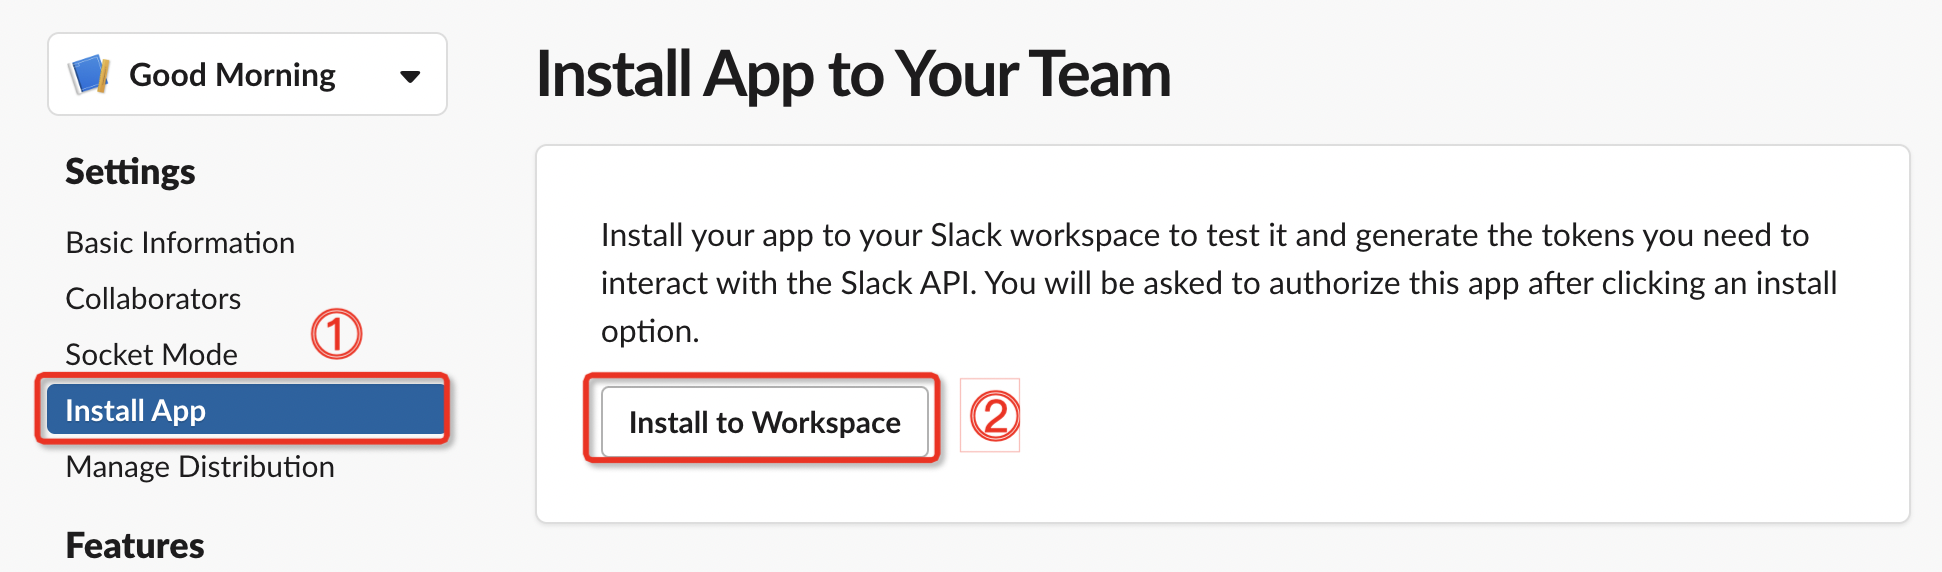 install app to workspace